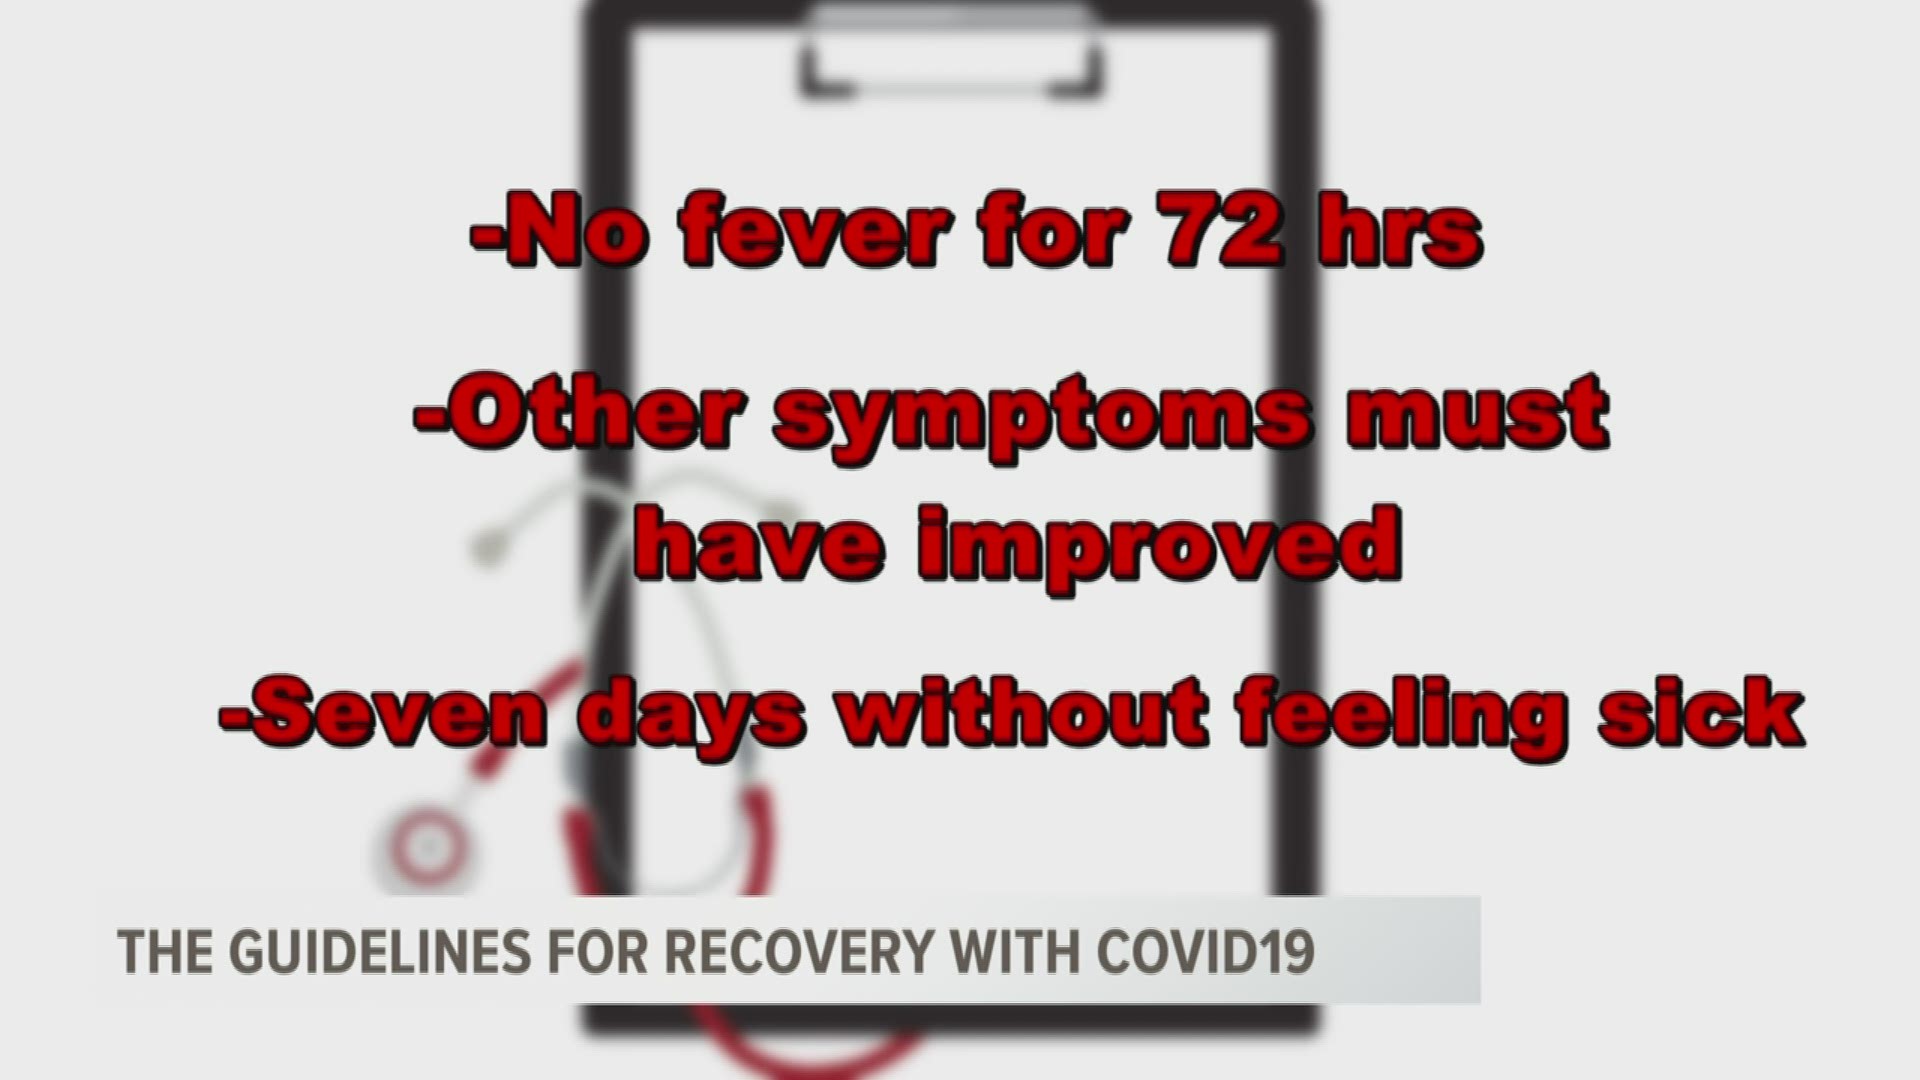 Nationally more than 95% of people with COVID-19 recover.